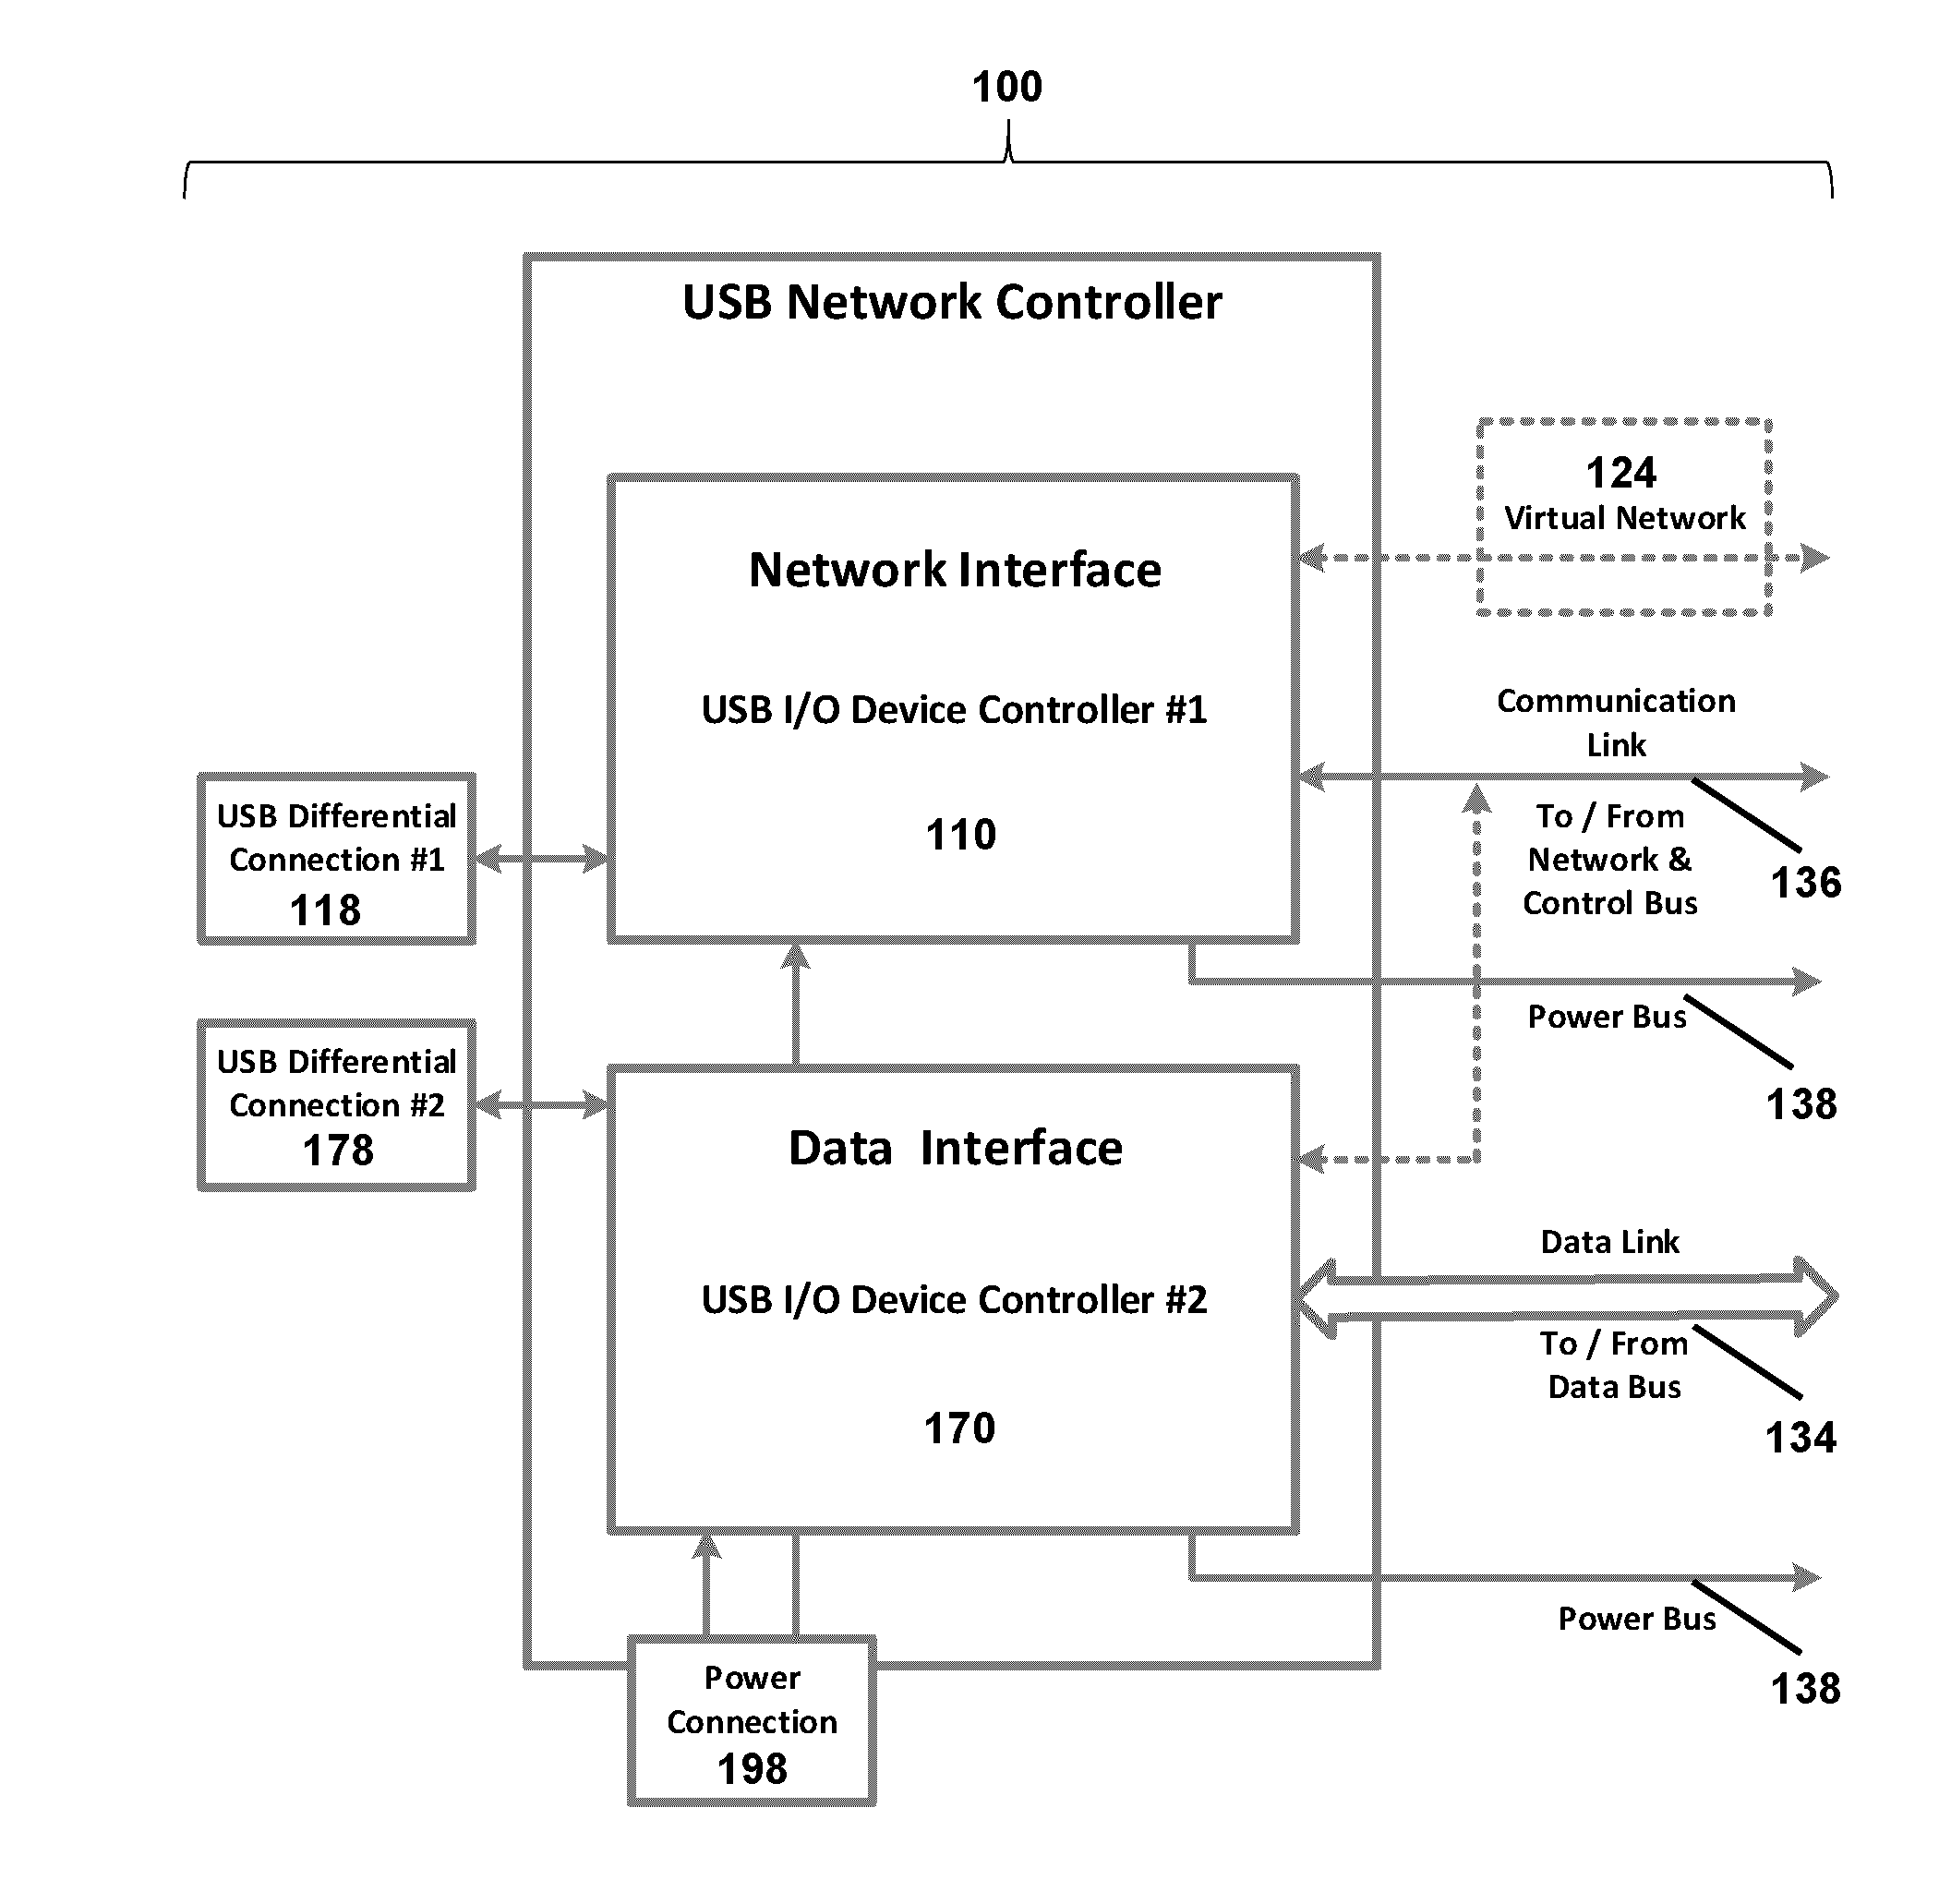 Link system for establishing high speed network communications and file transfer between hosts using I/O device links